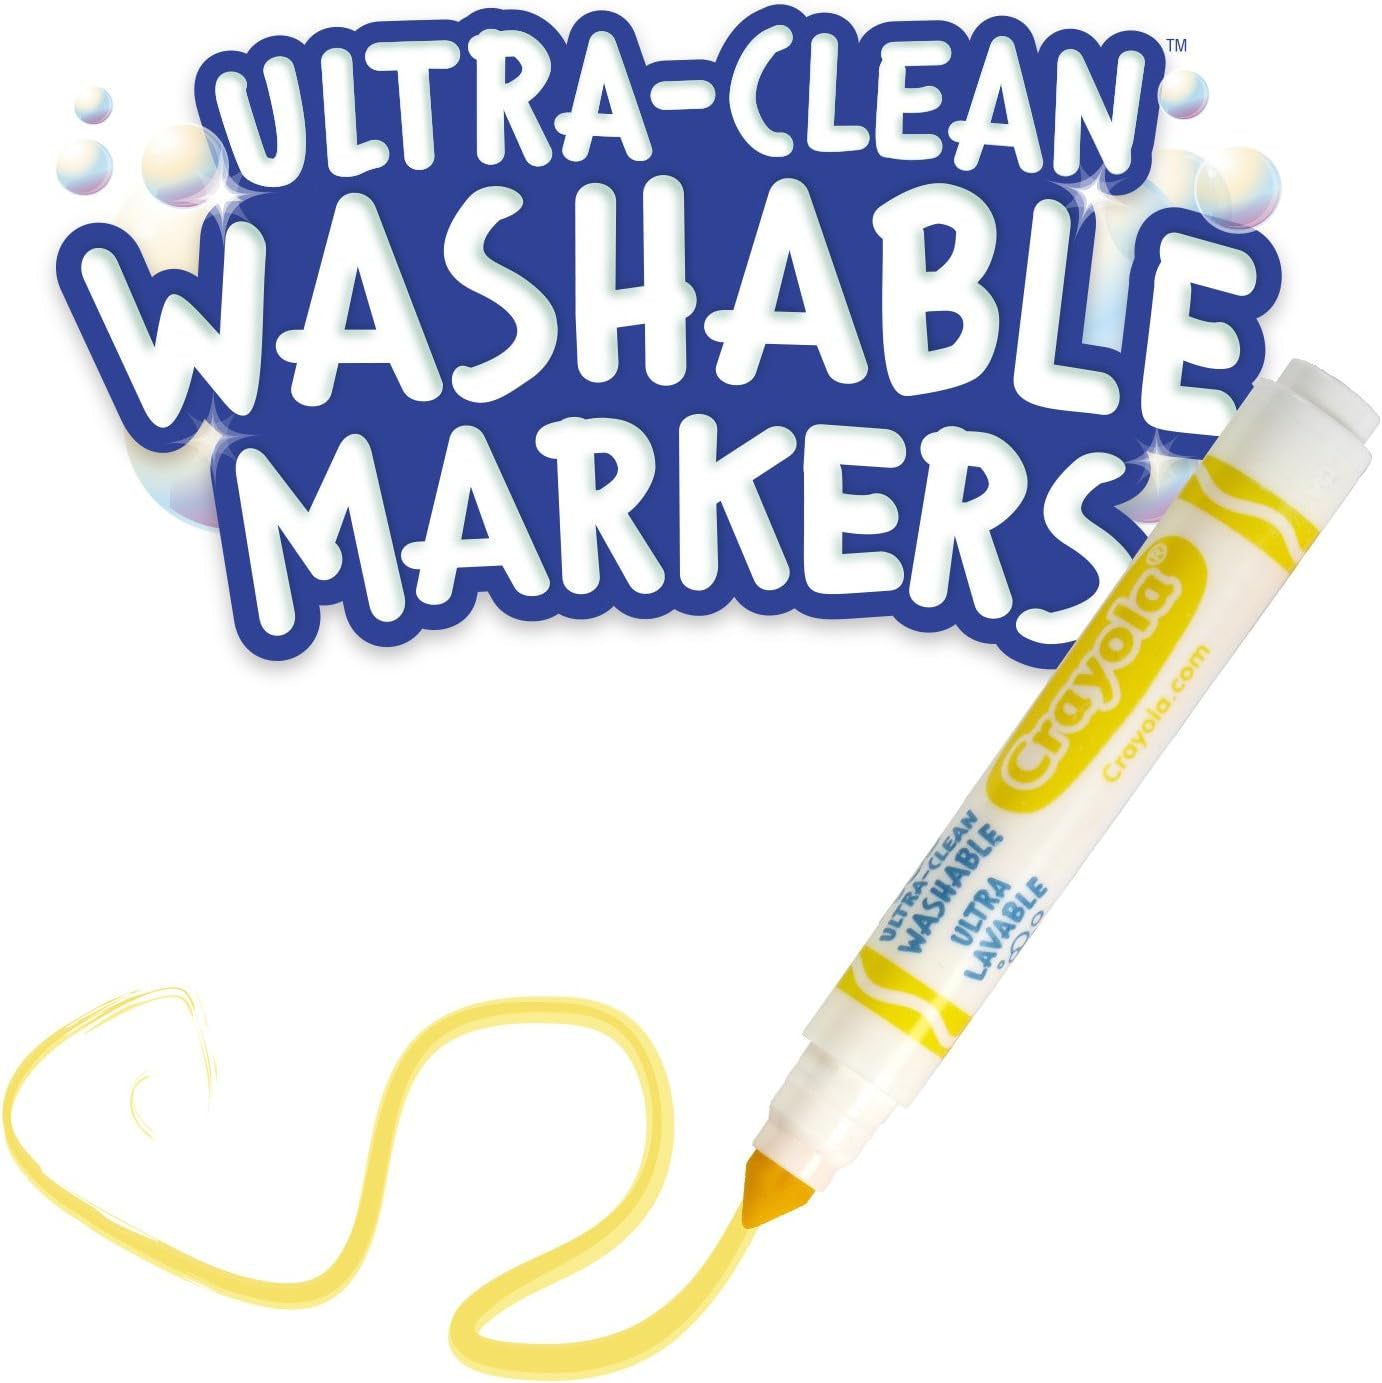 Ultra Clean Washable Markers Classpack (200 Count), Bulk Markers for Classrooms, School Supplies for Kids, 10 Colors